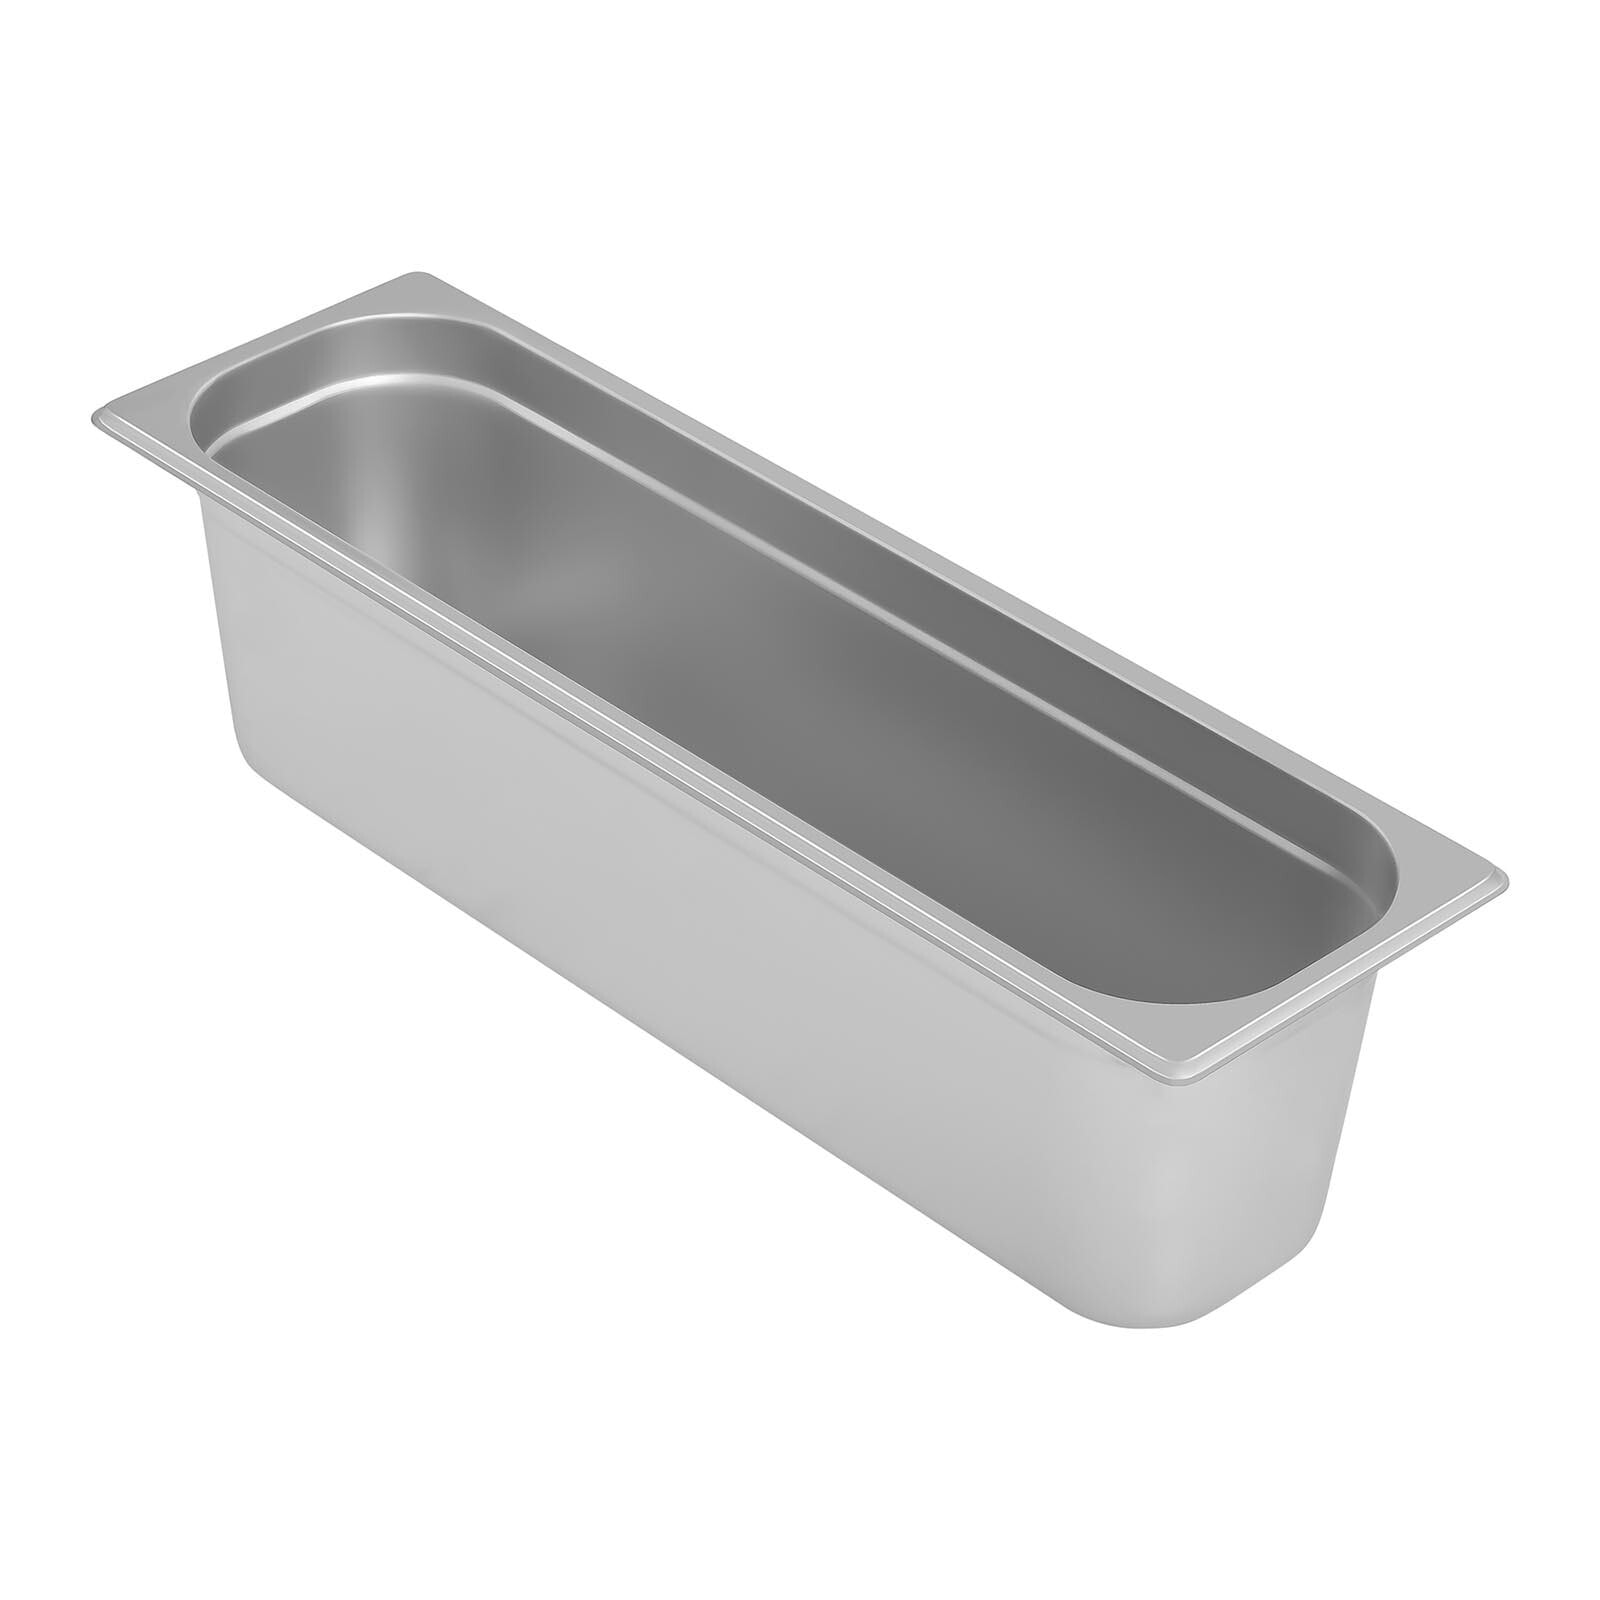 Stainless steel food container GN2 / 4 depth 150 mm